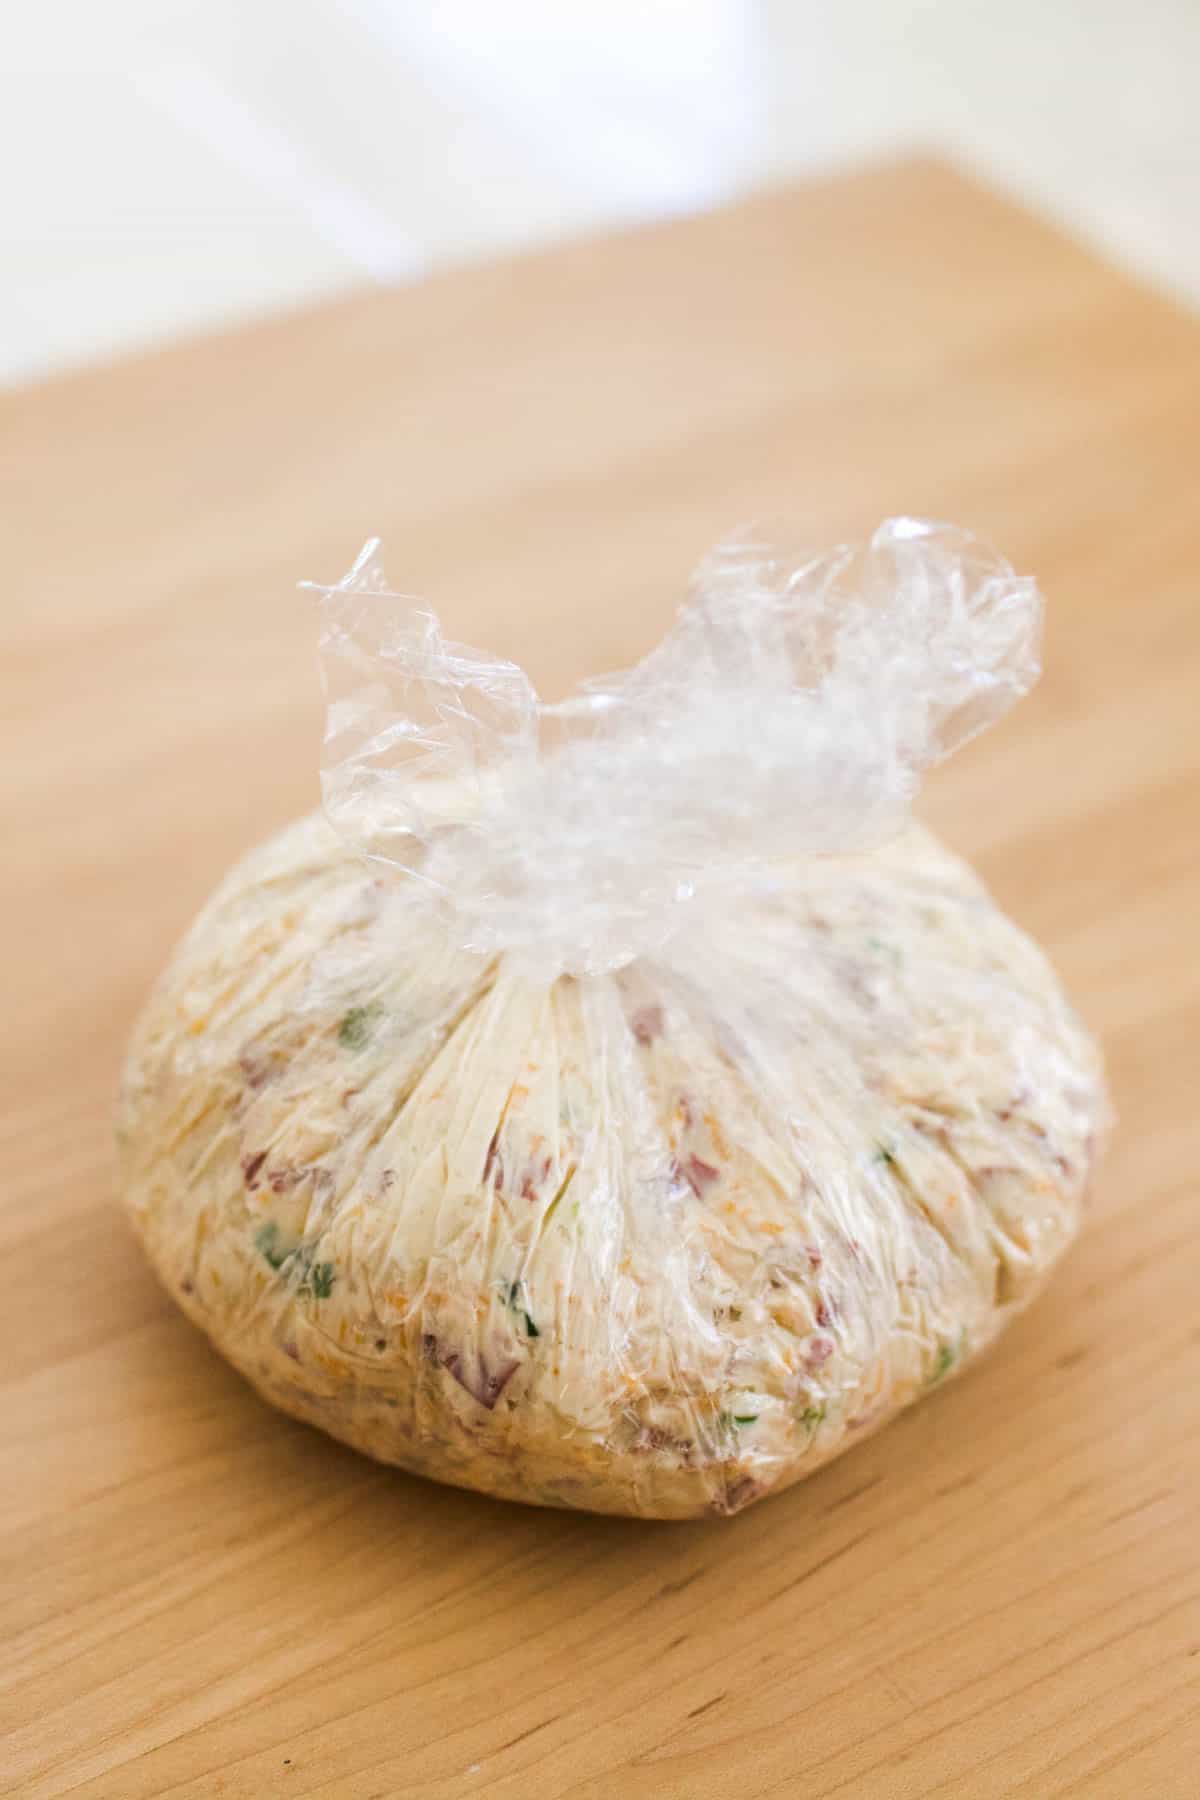 Cream cheese ball with dried beef wrapped up in plastic wrap on a counter.